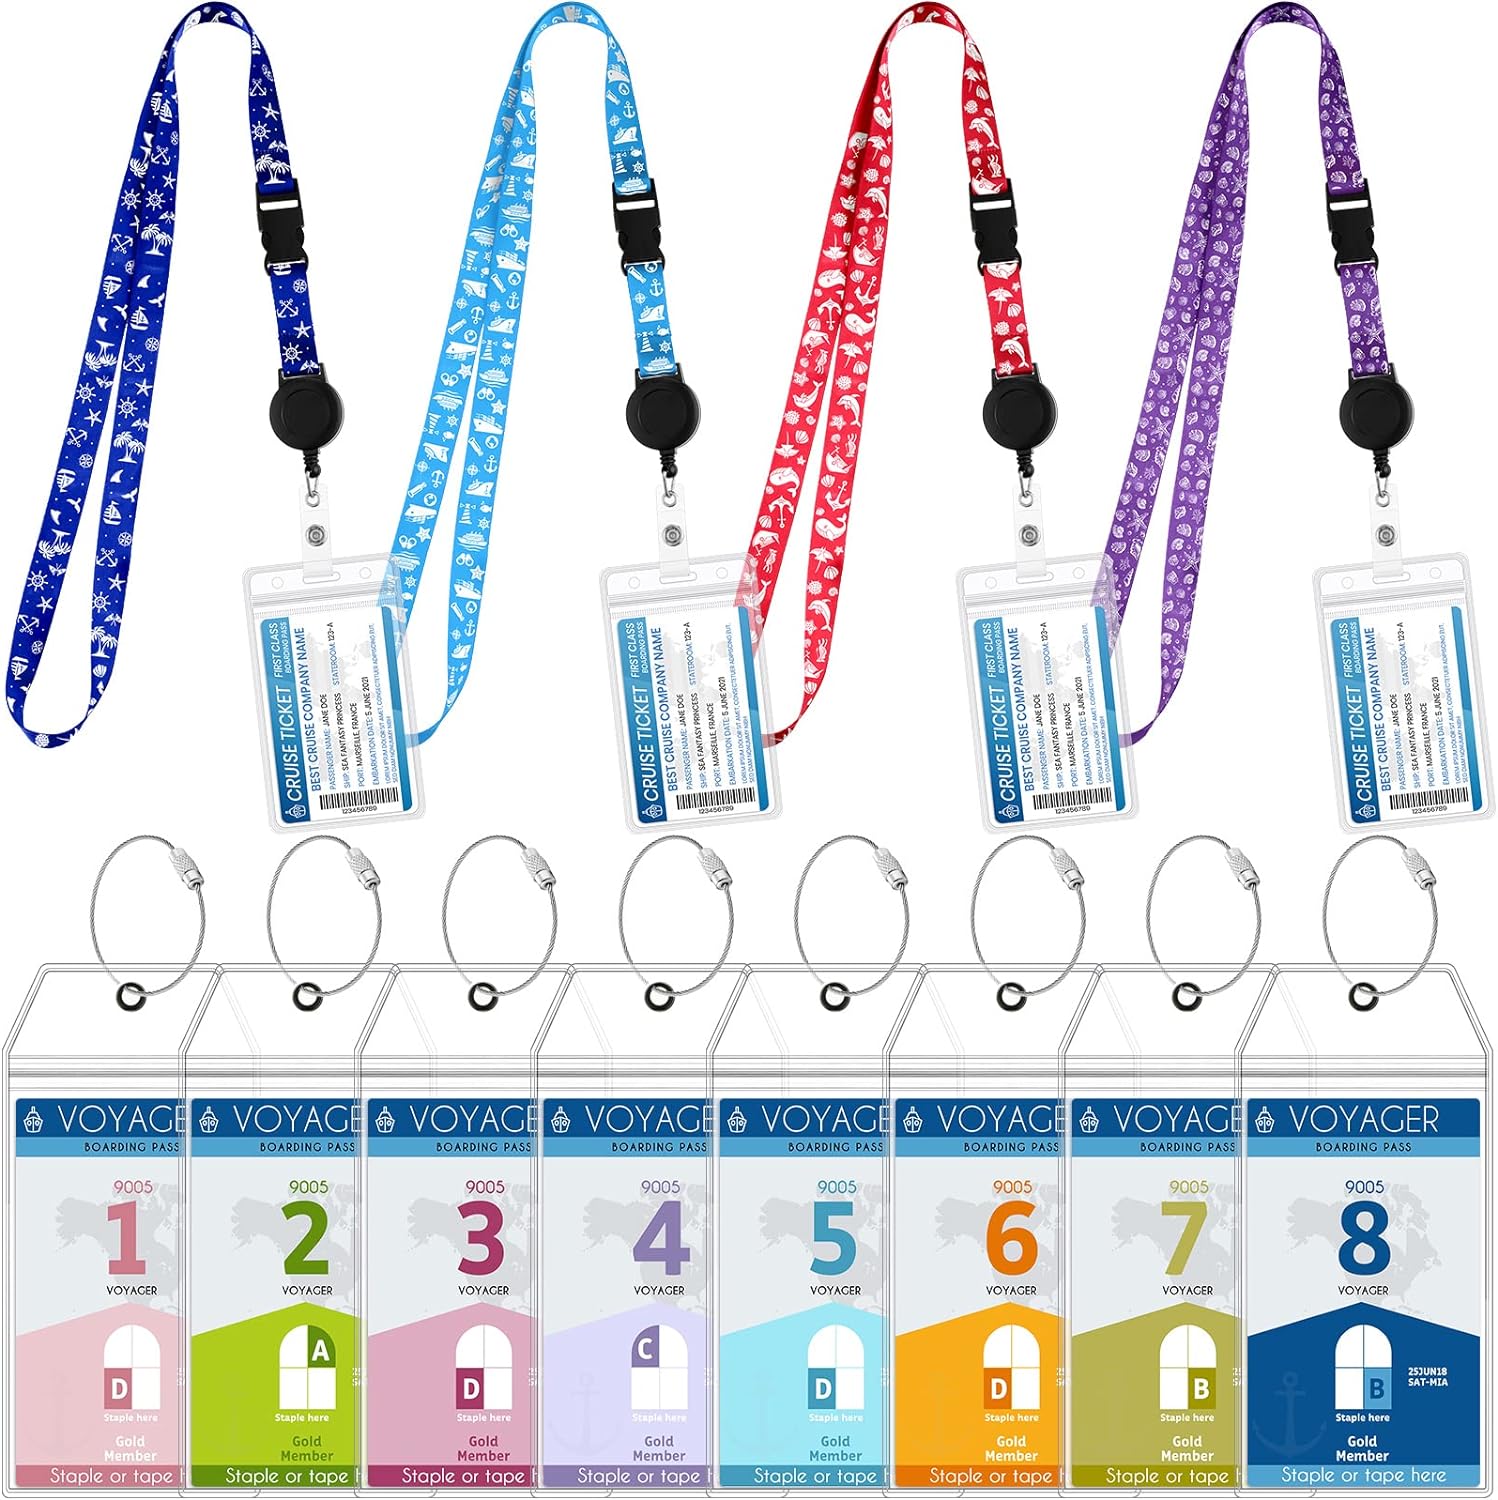 12 Pack Cruise Lanyards with Ship Card Holders Retractable Cruise Luggage Tag Holder Cruise Kit Zip Seal and Steel Cruise Accessorie Essentials Waterproof Cruise Holder for Celebrity Cruise (Fresh)